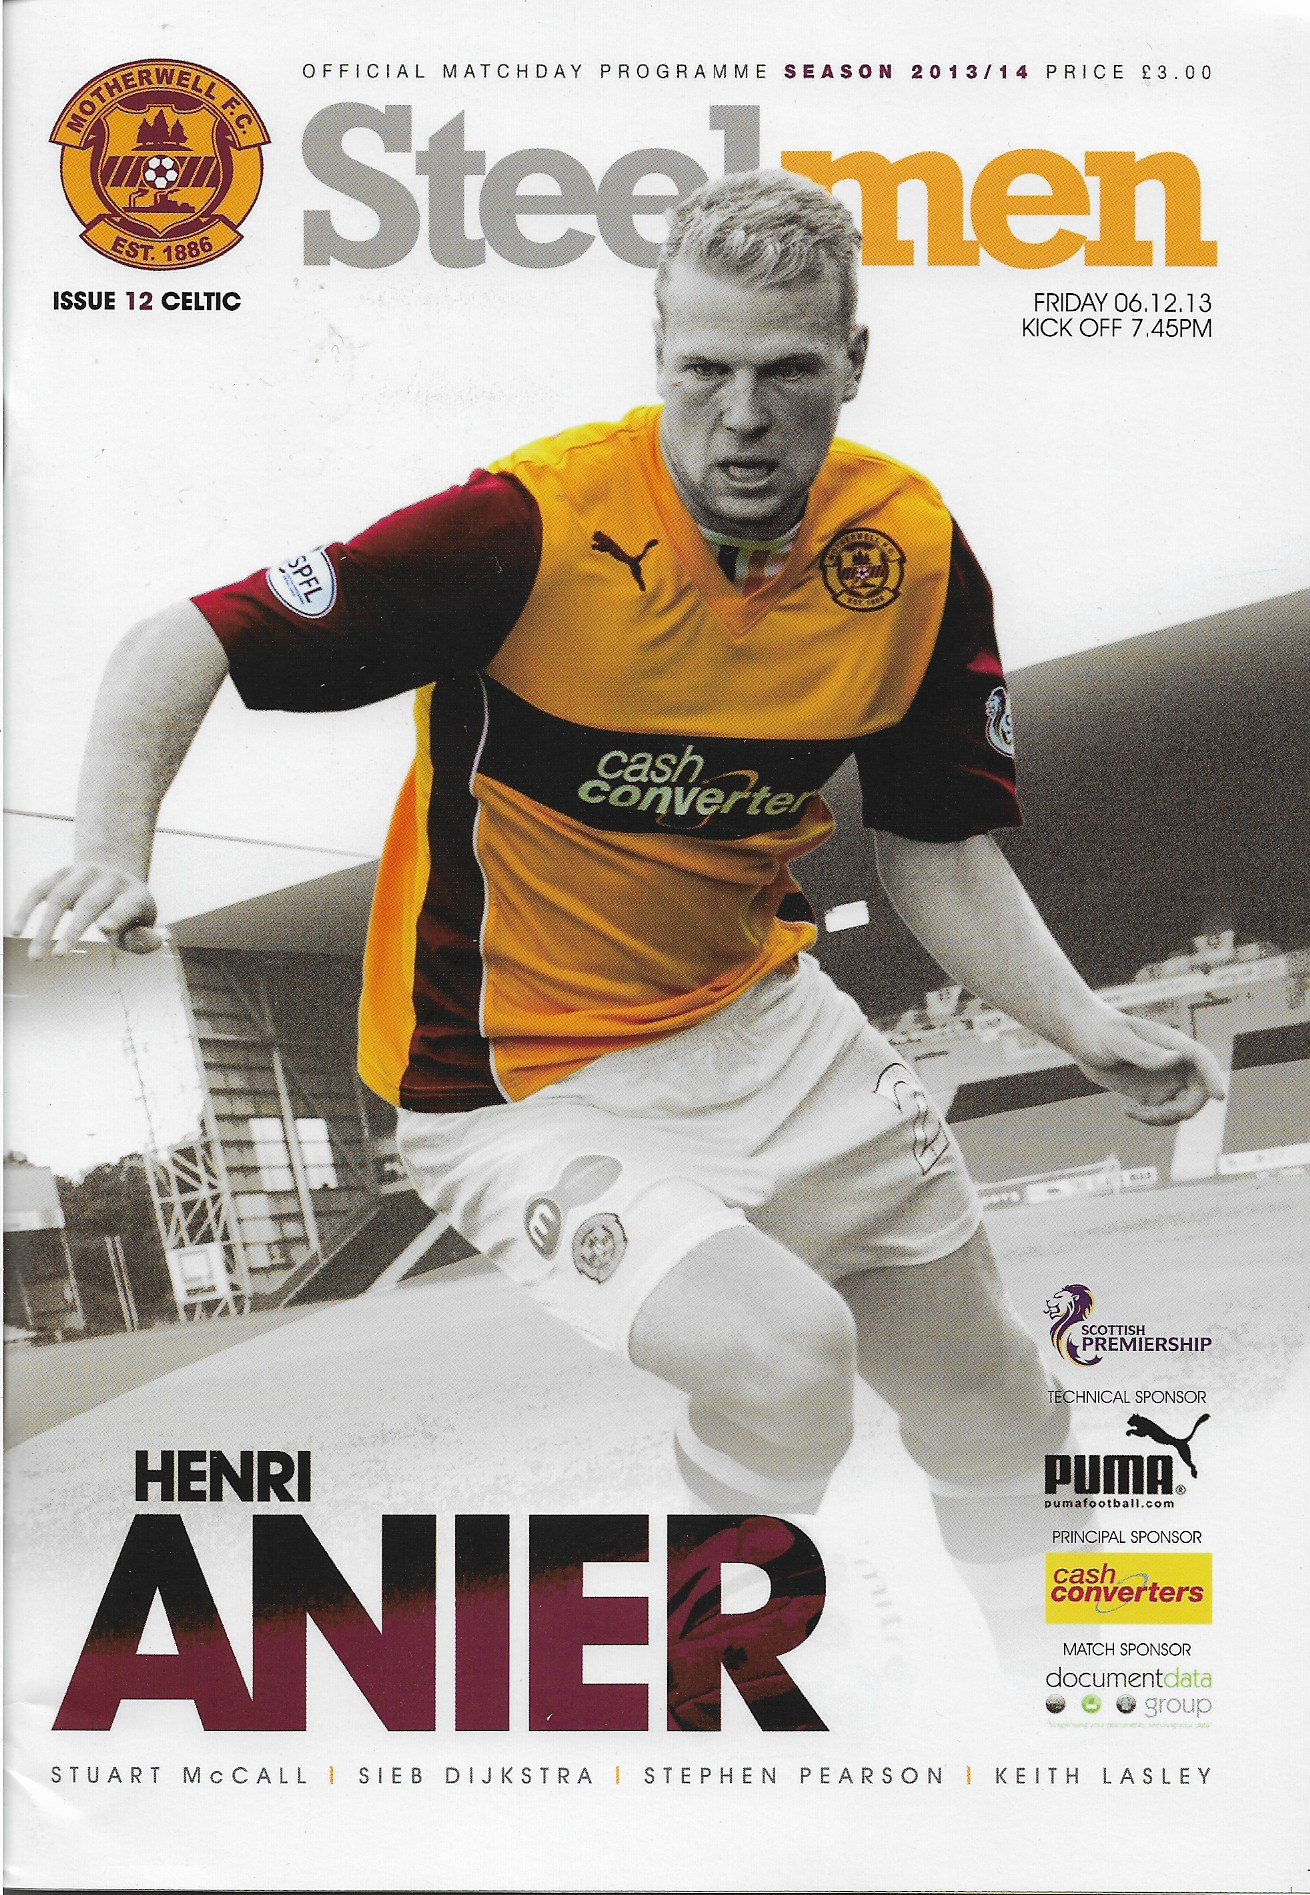 Programme Cover 2013/14